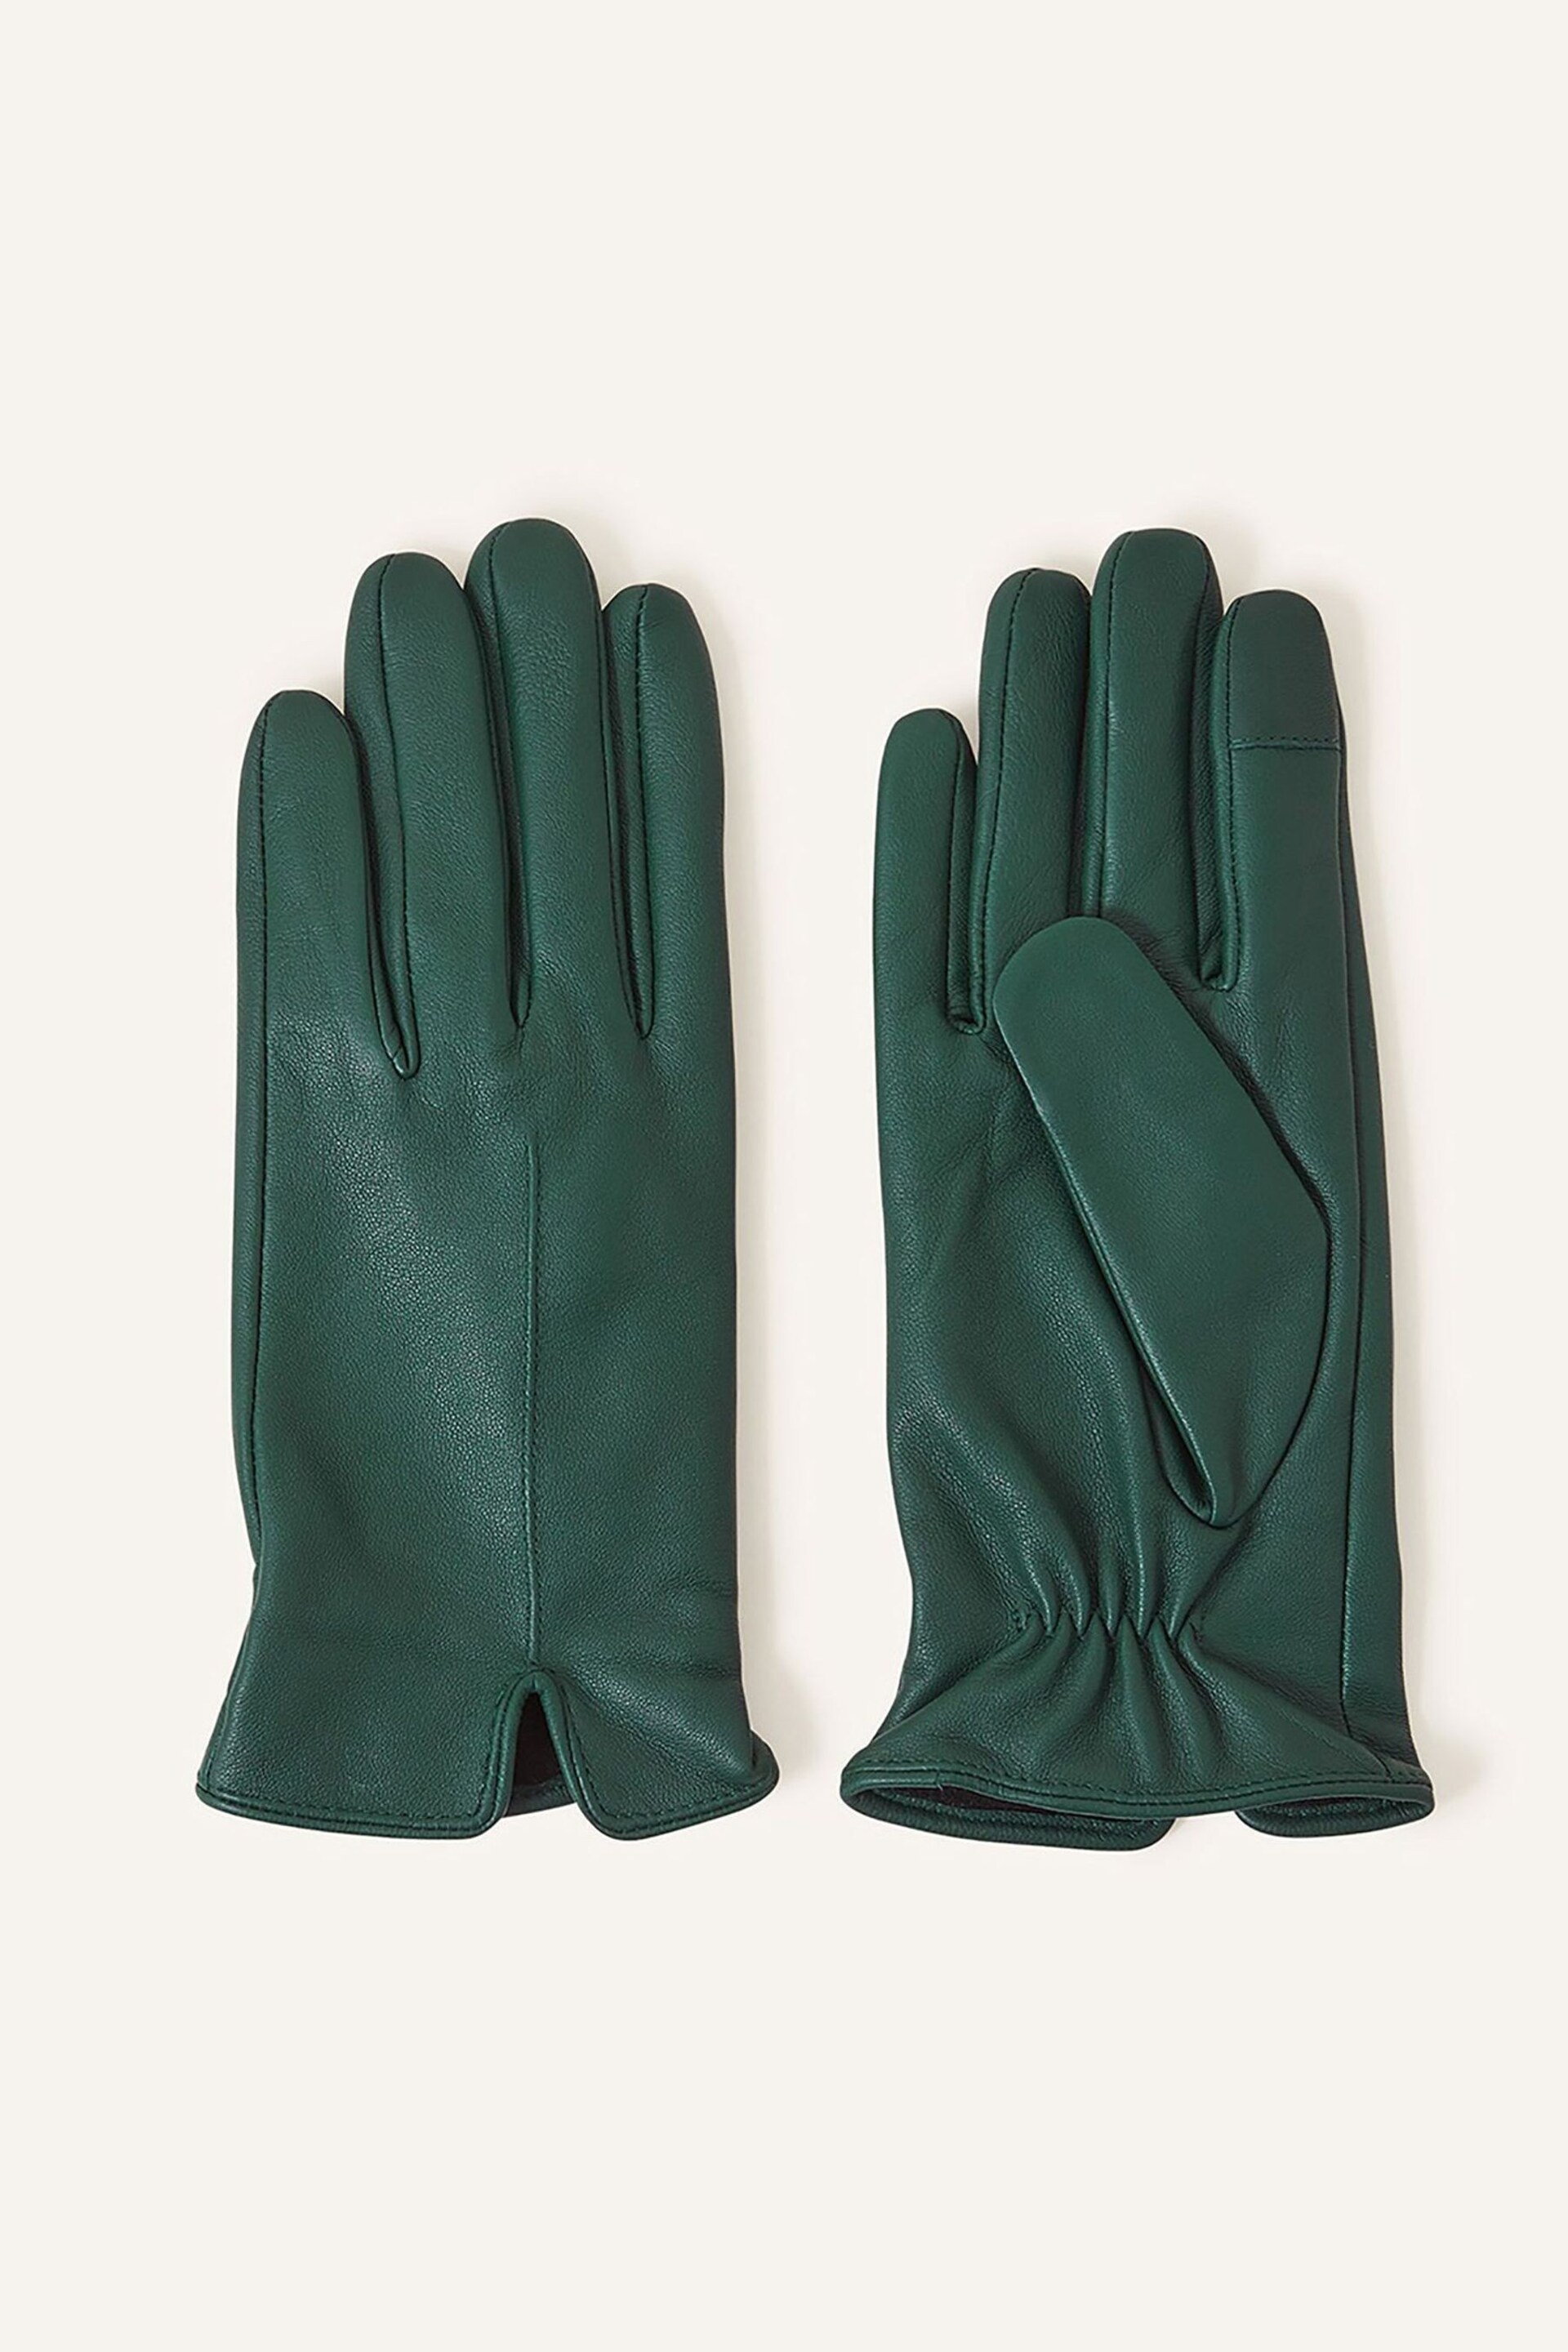 Accessorize Green Touch Screen Leather Gloves - Image 1 of 2